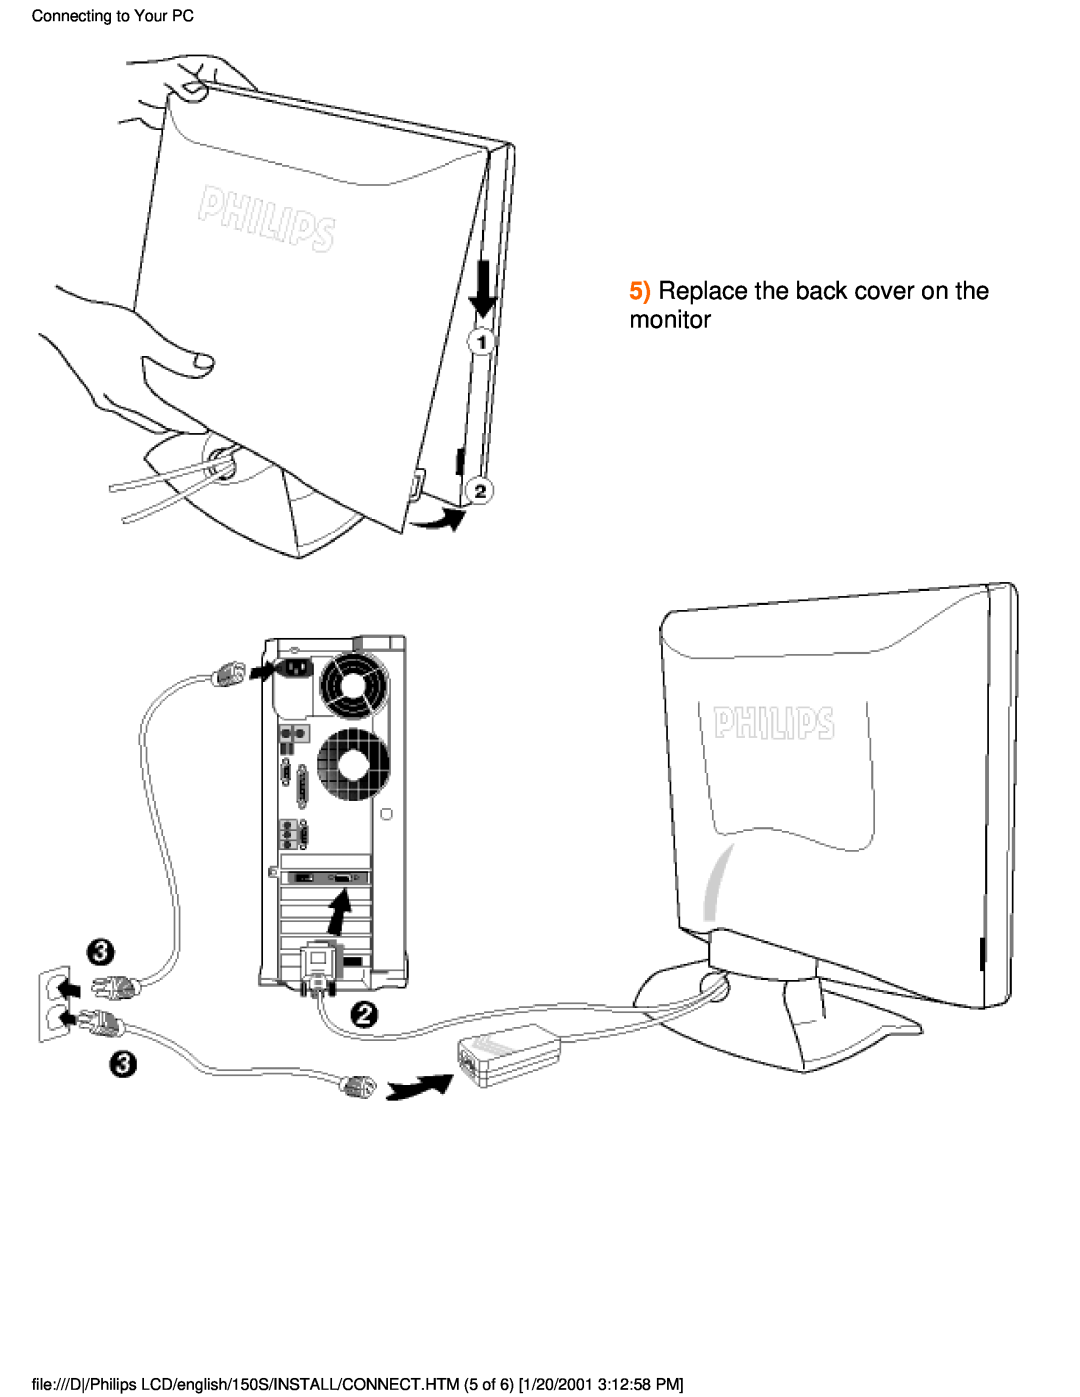 Philips 150S user manual Replace the back cover on the monitor, Connecting to Your PC 